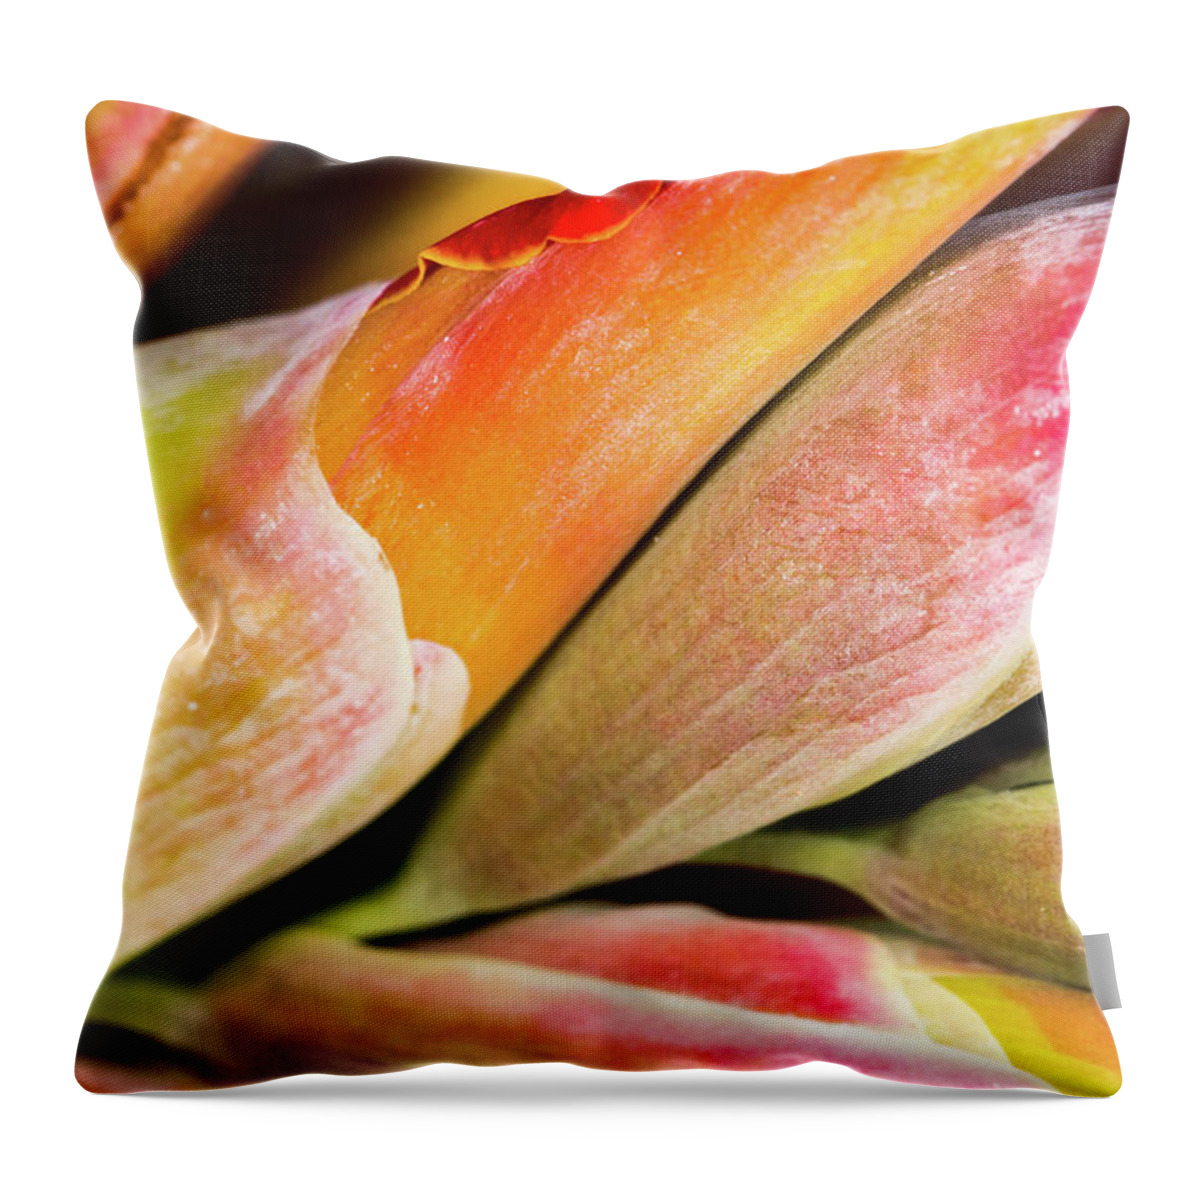 Abstract Throw Pillow featuring the photograph Wrapped Red Canna Flowers by SR Green